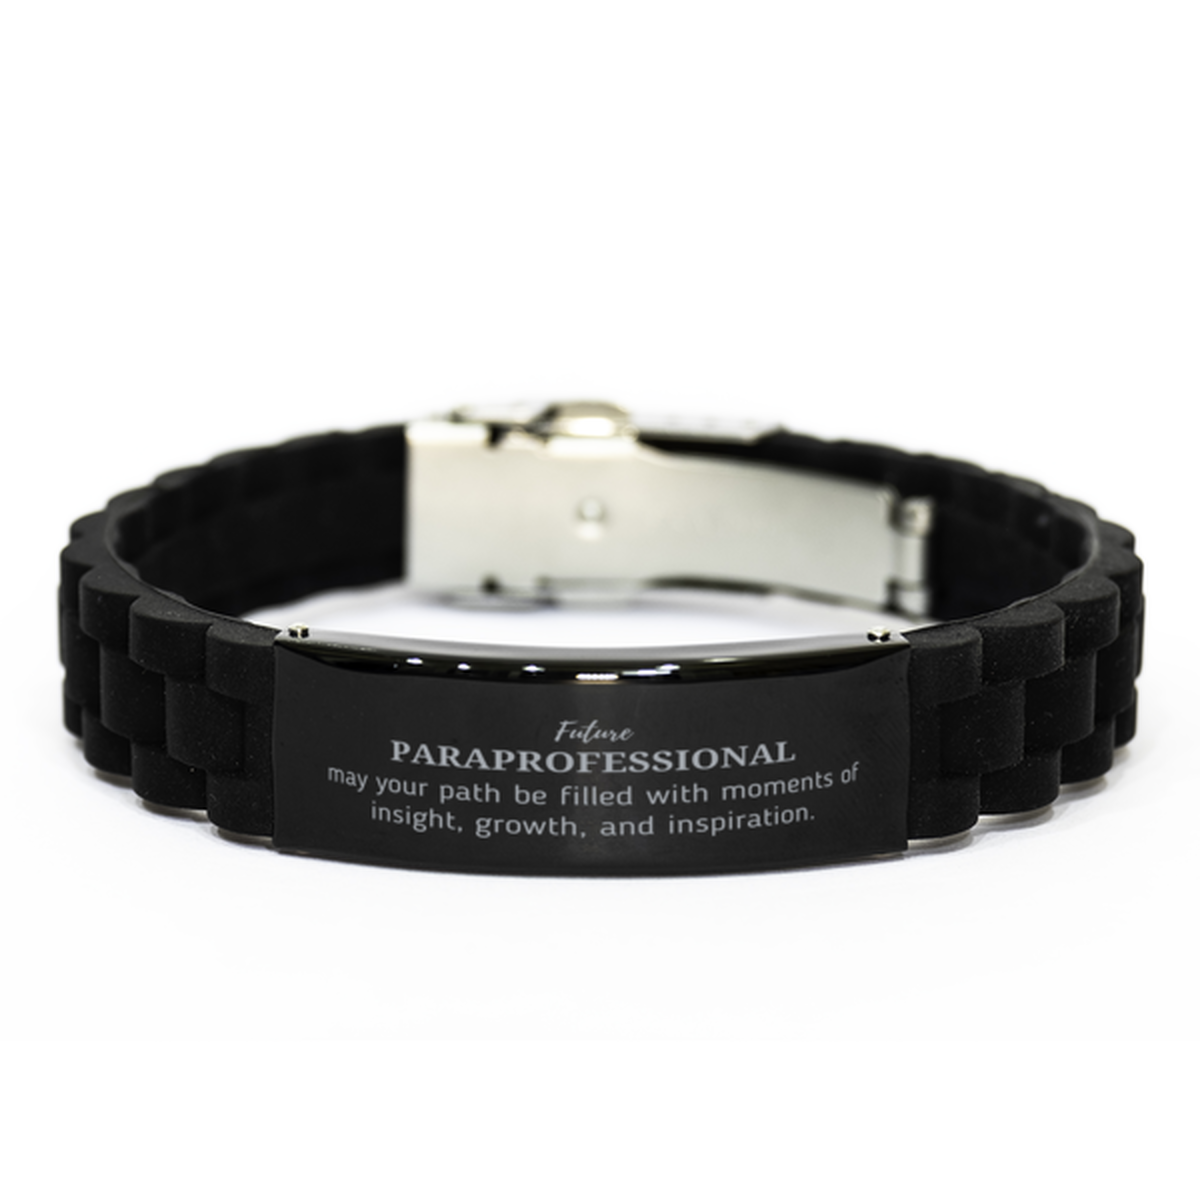 Future Paraprofessional Gifts, May your path be filled with moments of insight, Graduation Gifts for New Paraprofessional, Christmas Unique Black Glidelock Clasp Bracelet For Men, Women, Friends